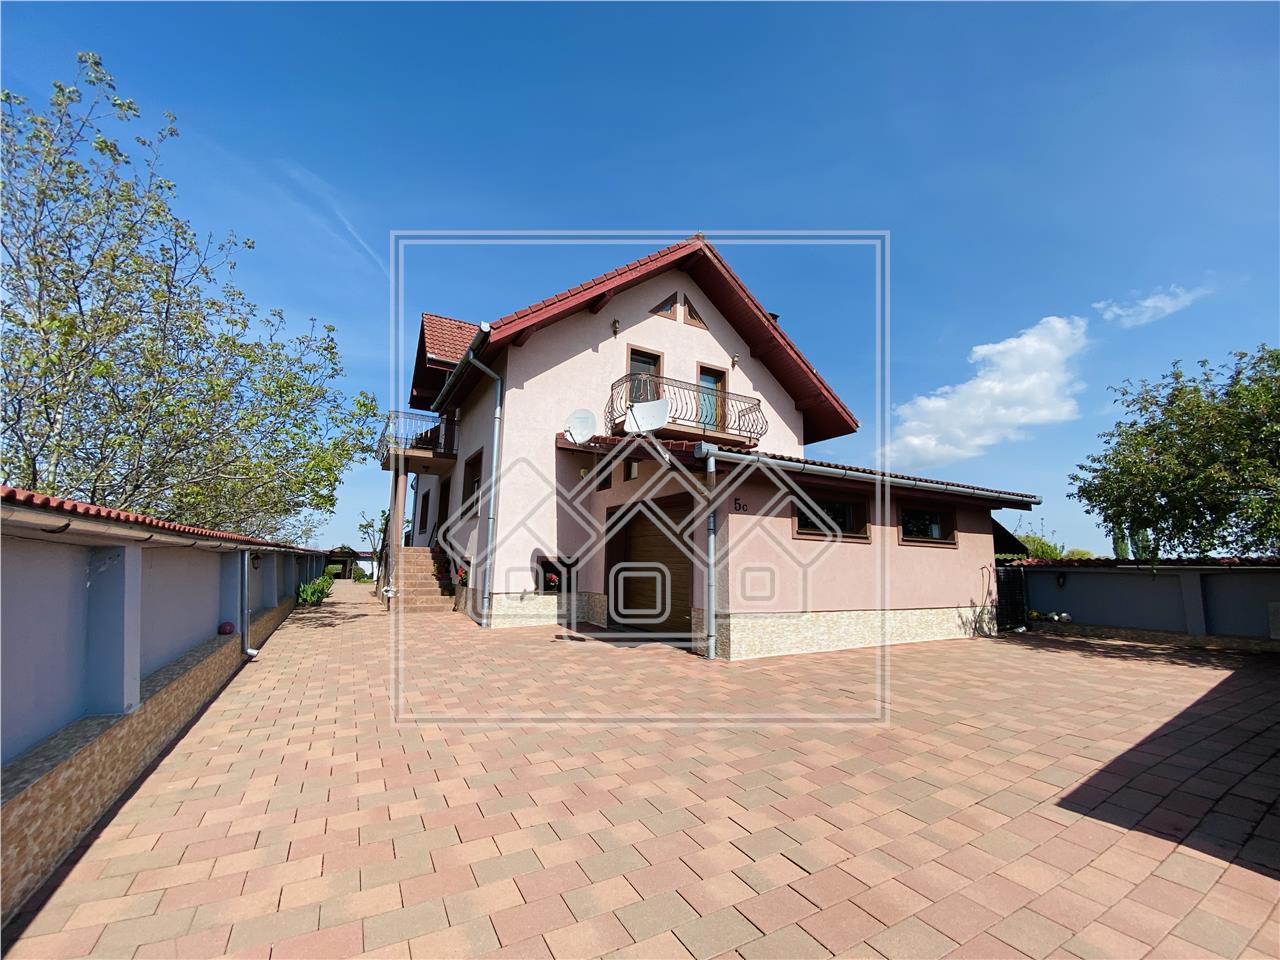 House for sale in Sibiu - 7 rooms + Garage, cellar - Land 600 sqm